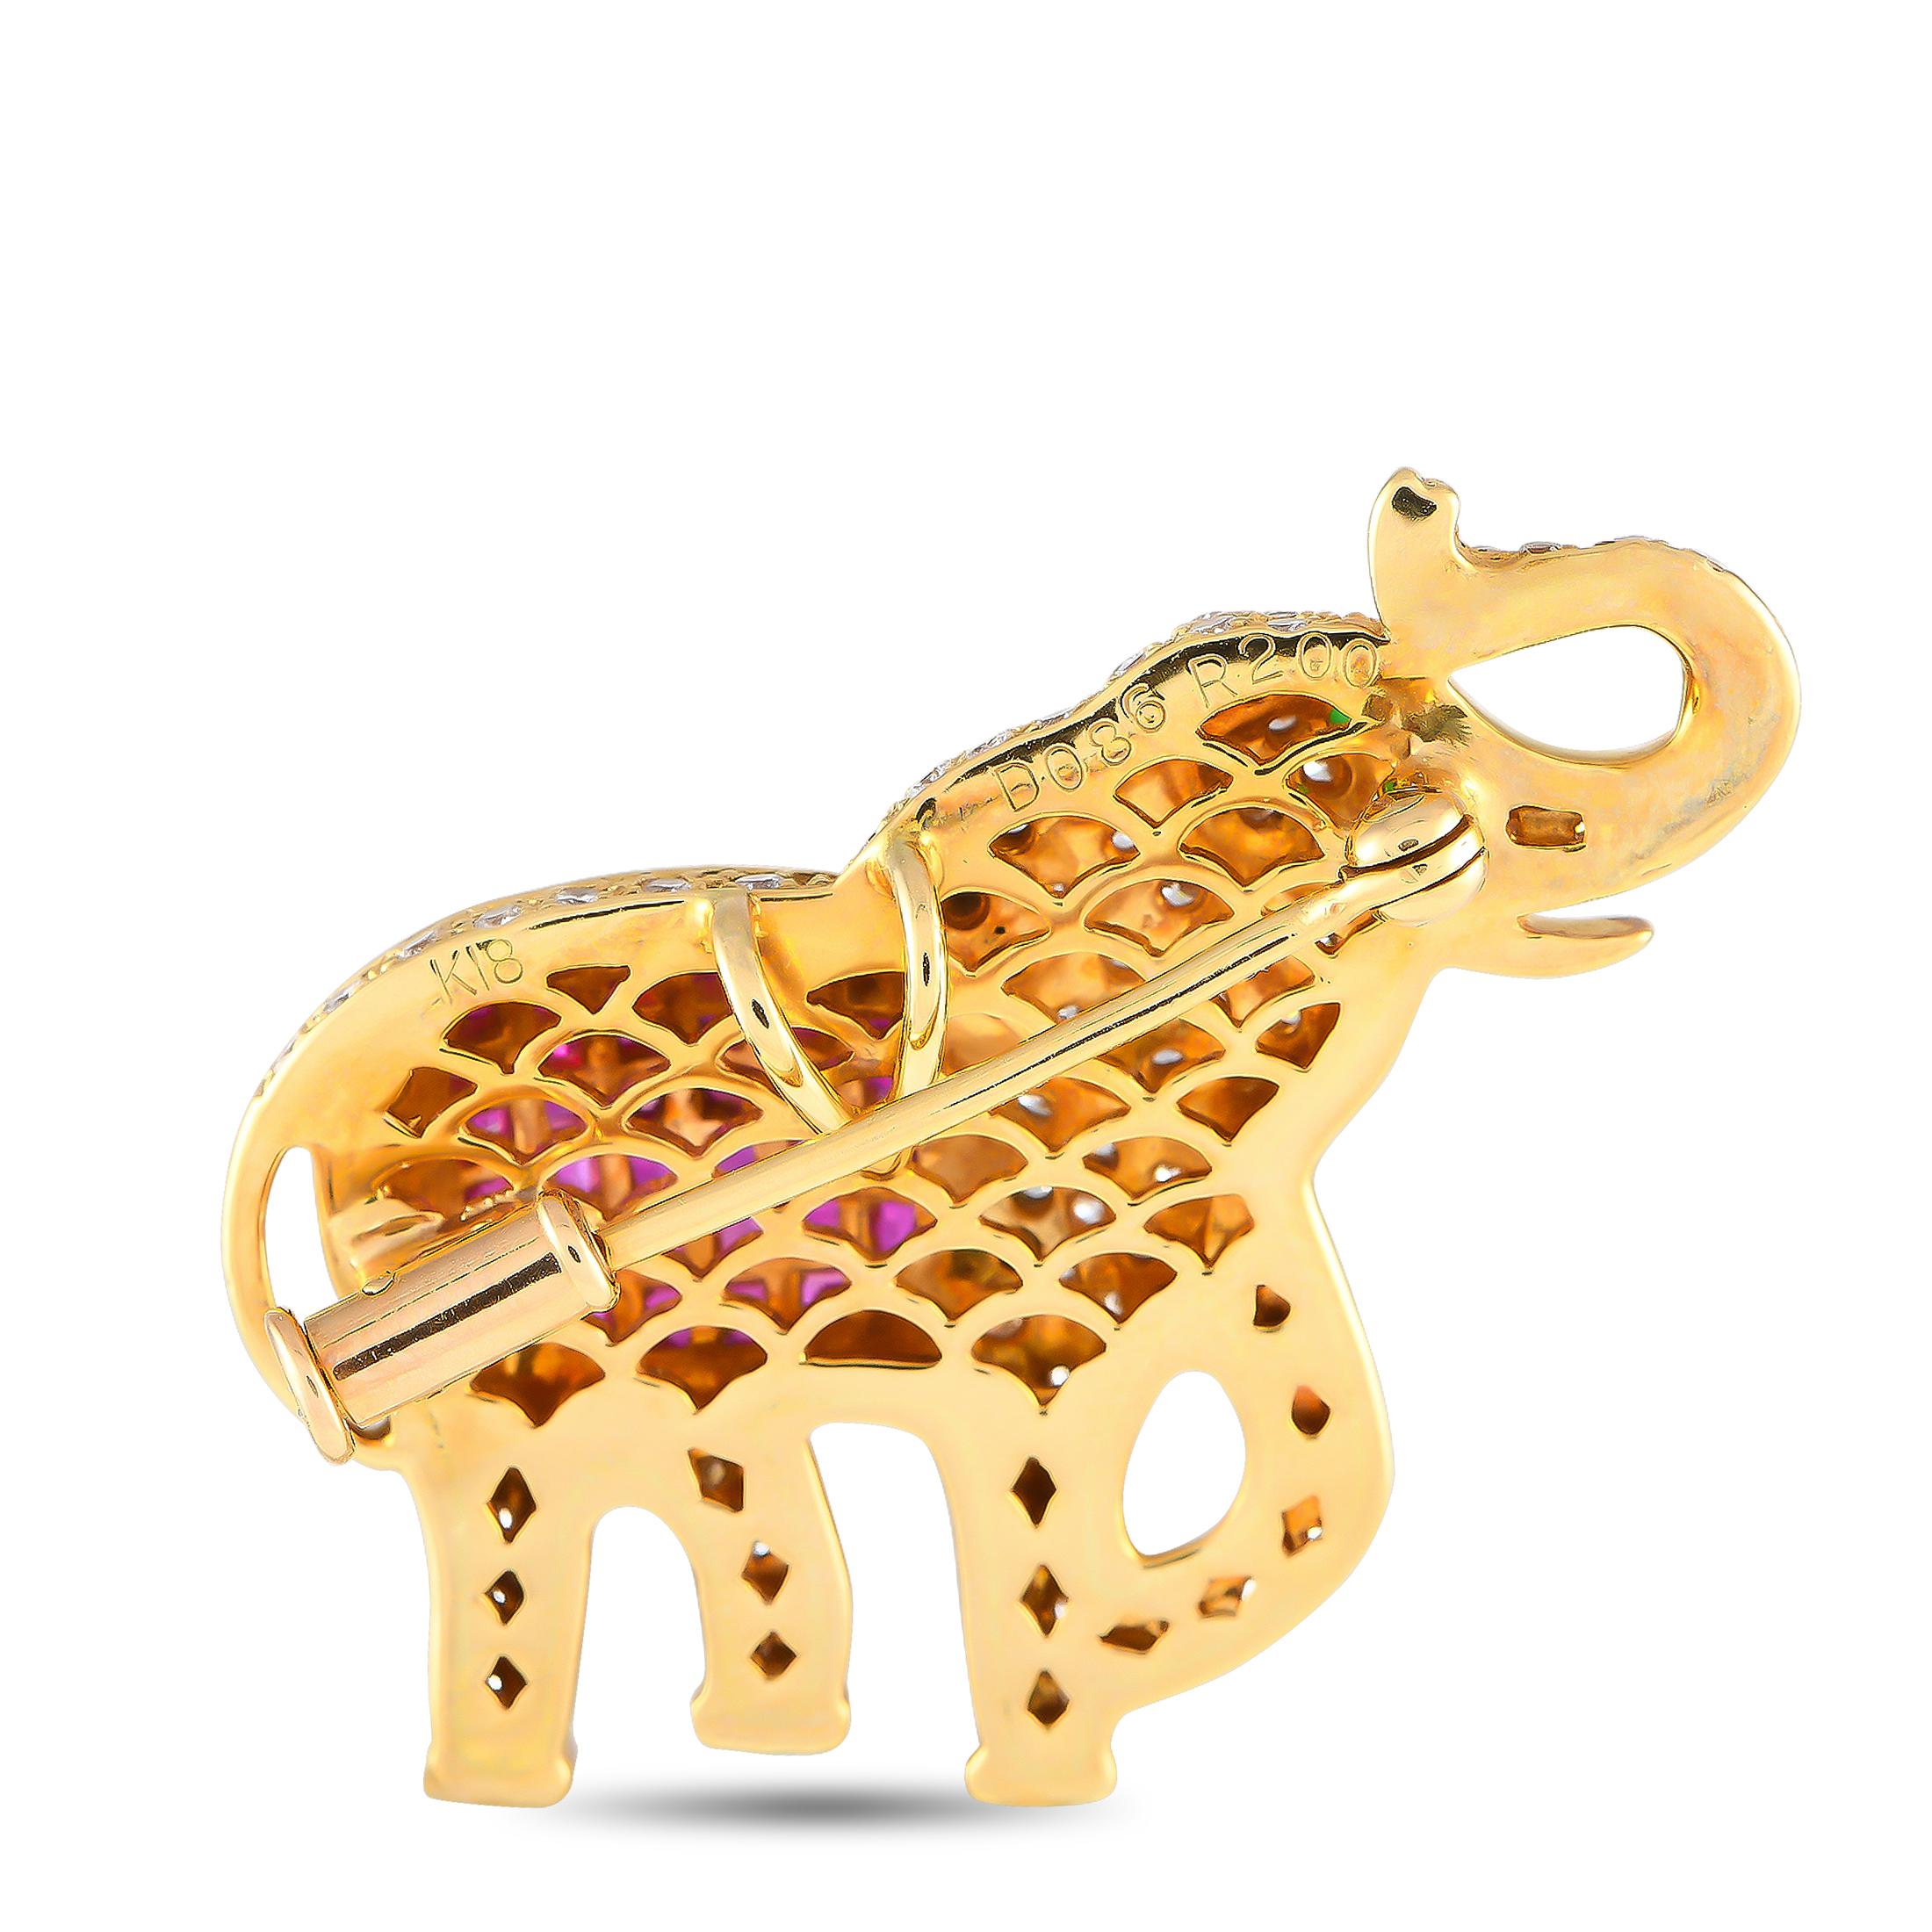 Attract good fortune and good luck with this diamond and ruby elephant brooch. This whimsical accessory is fashioned in 18K yellow gold and is fully covered with round brilliant diamonds. A cushion-shaped bezel on the elephant's body features 2.0